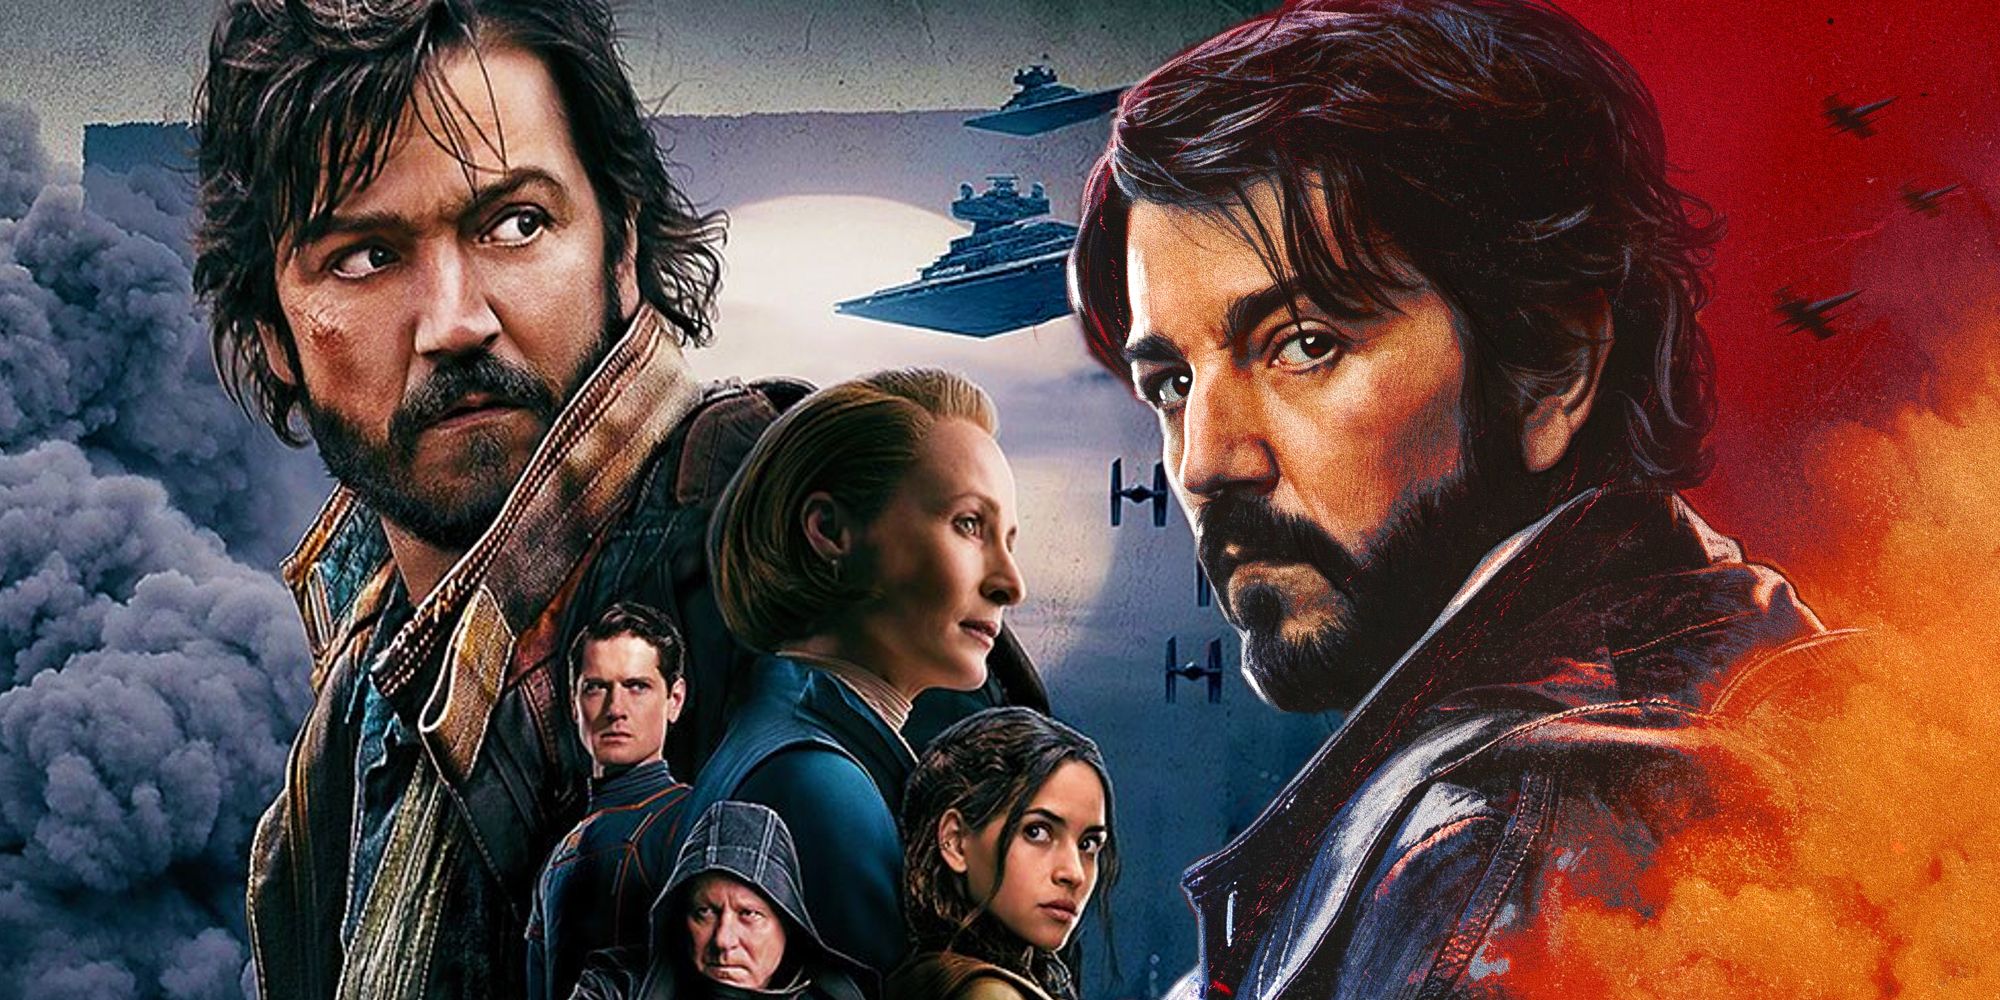 The official poster for Andor next to the character poster for Cassian Andor